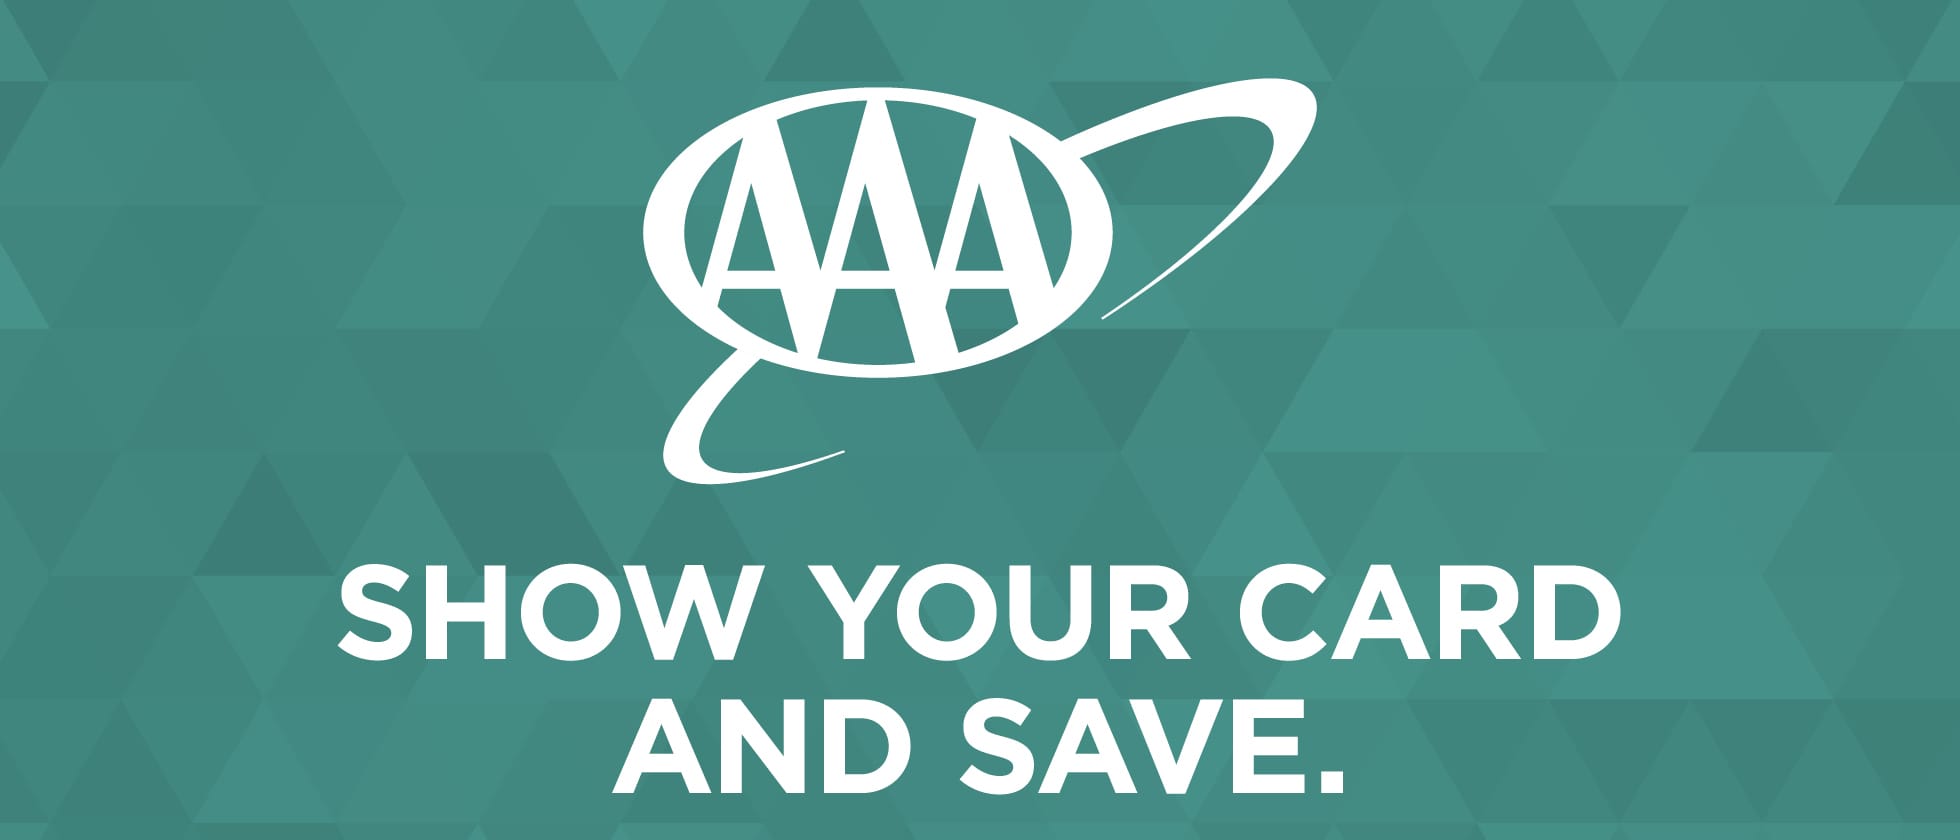 Show your AAA card and save